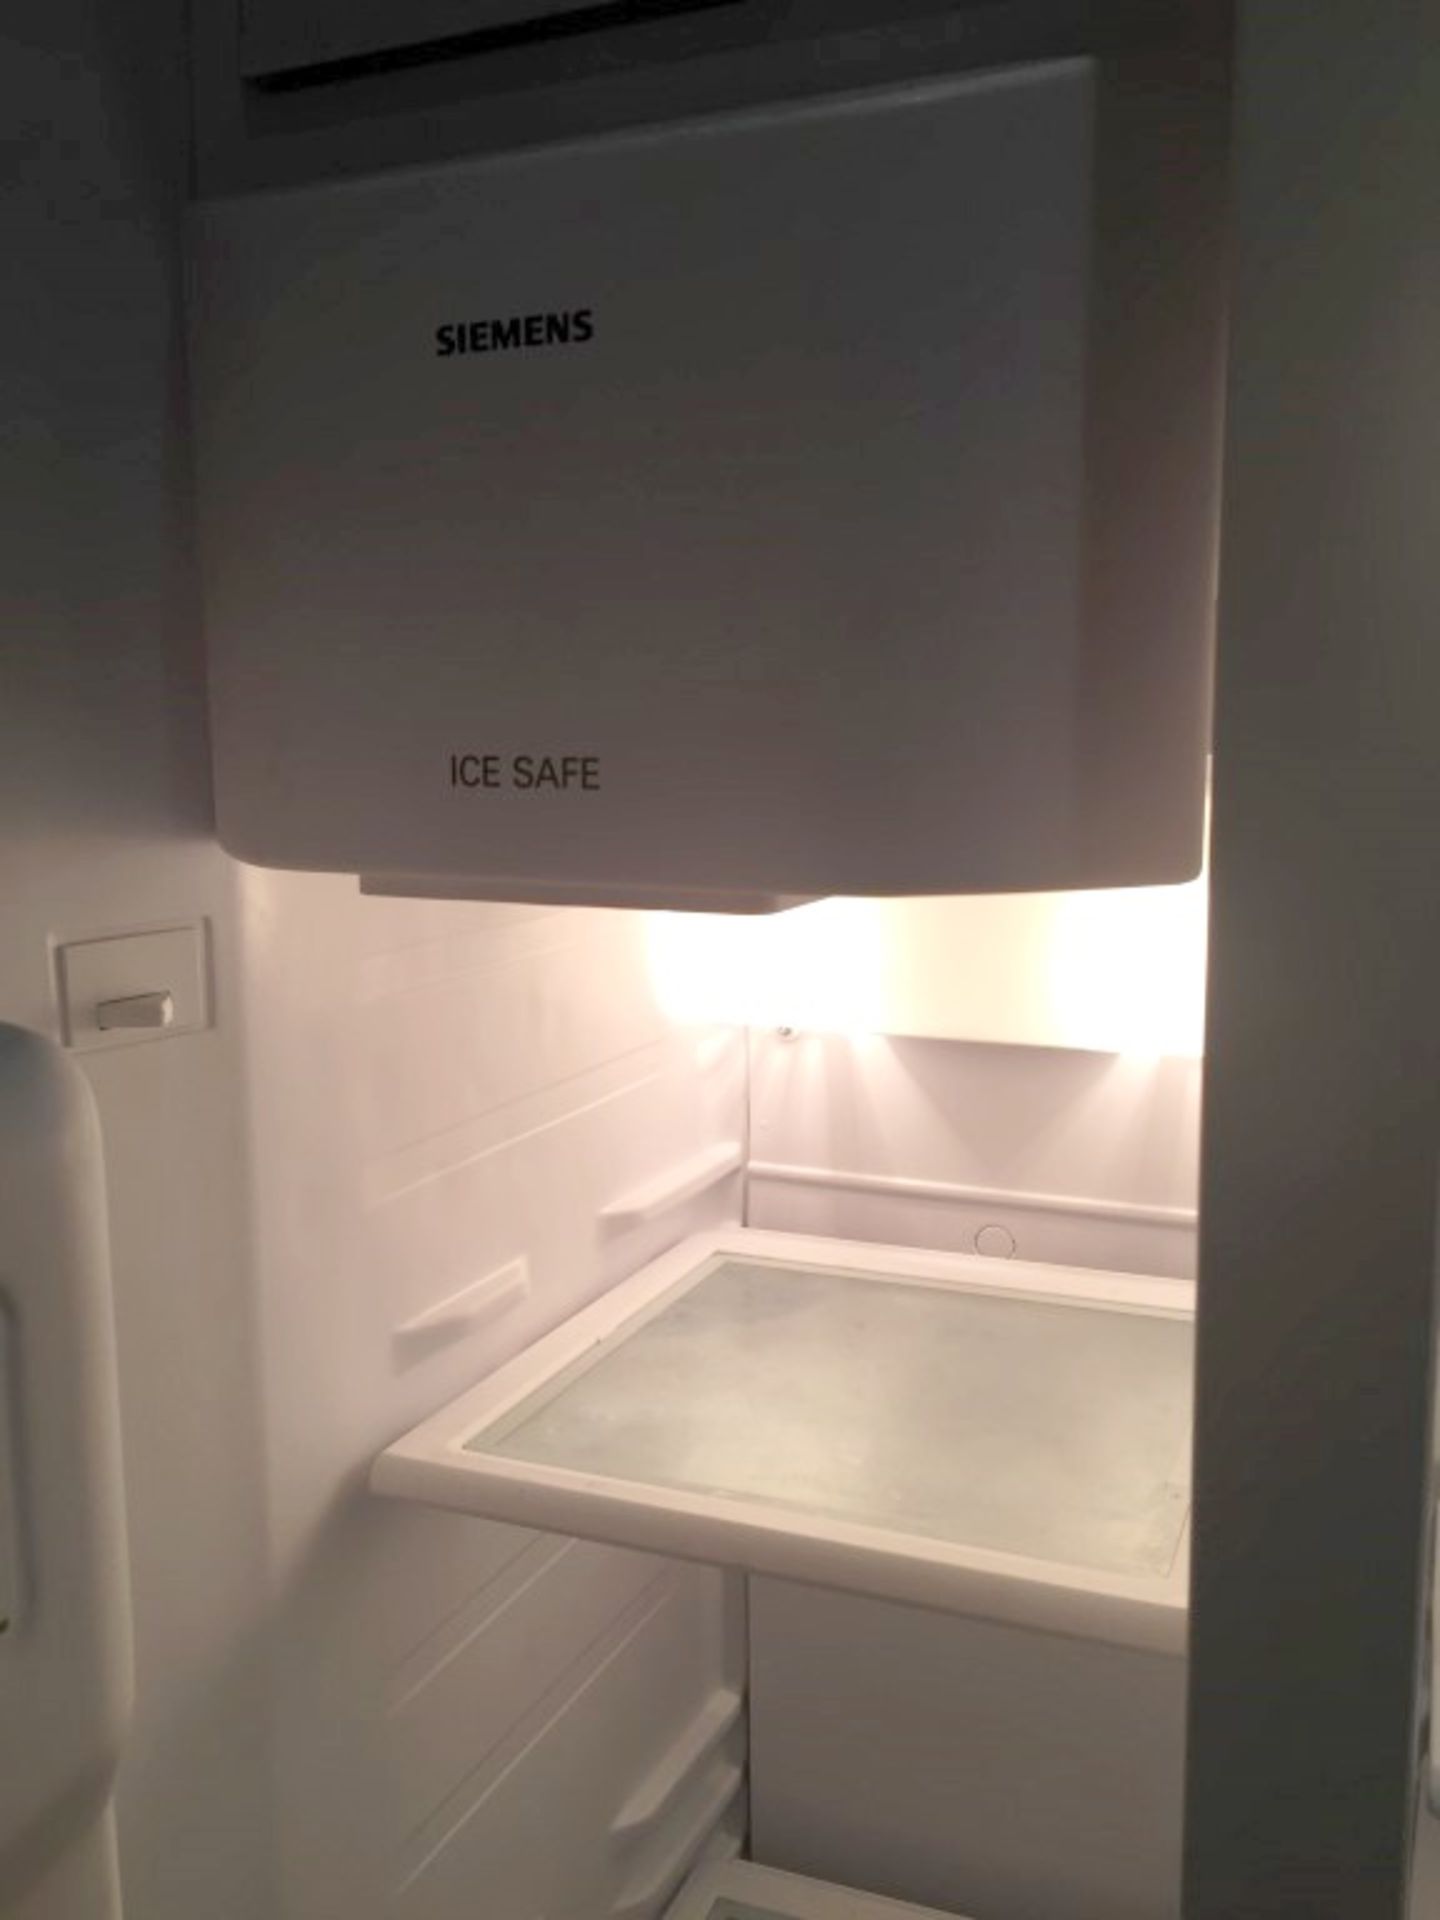 1 x Siemens American Fridge / Freezer - Approx 3-4yrs Old In Excellent Working Condition - CL211 - - Image 4 of 8